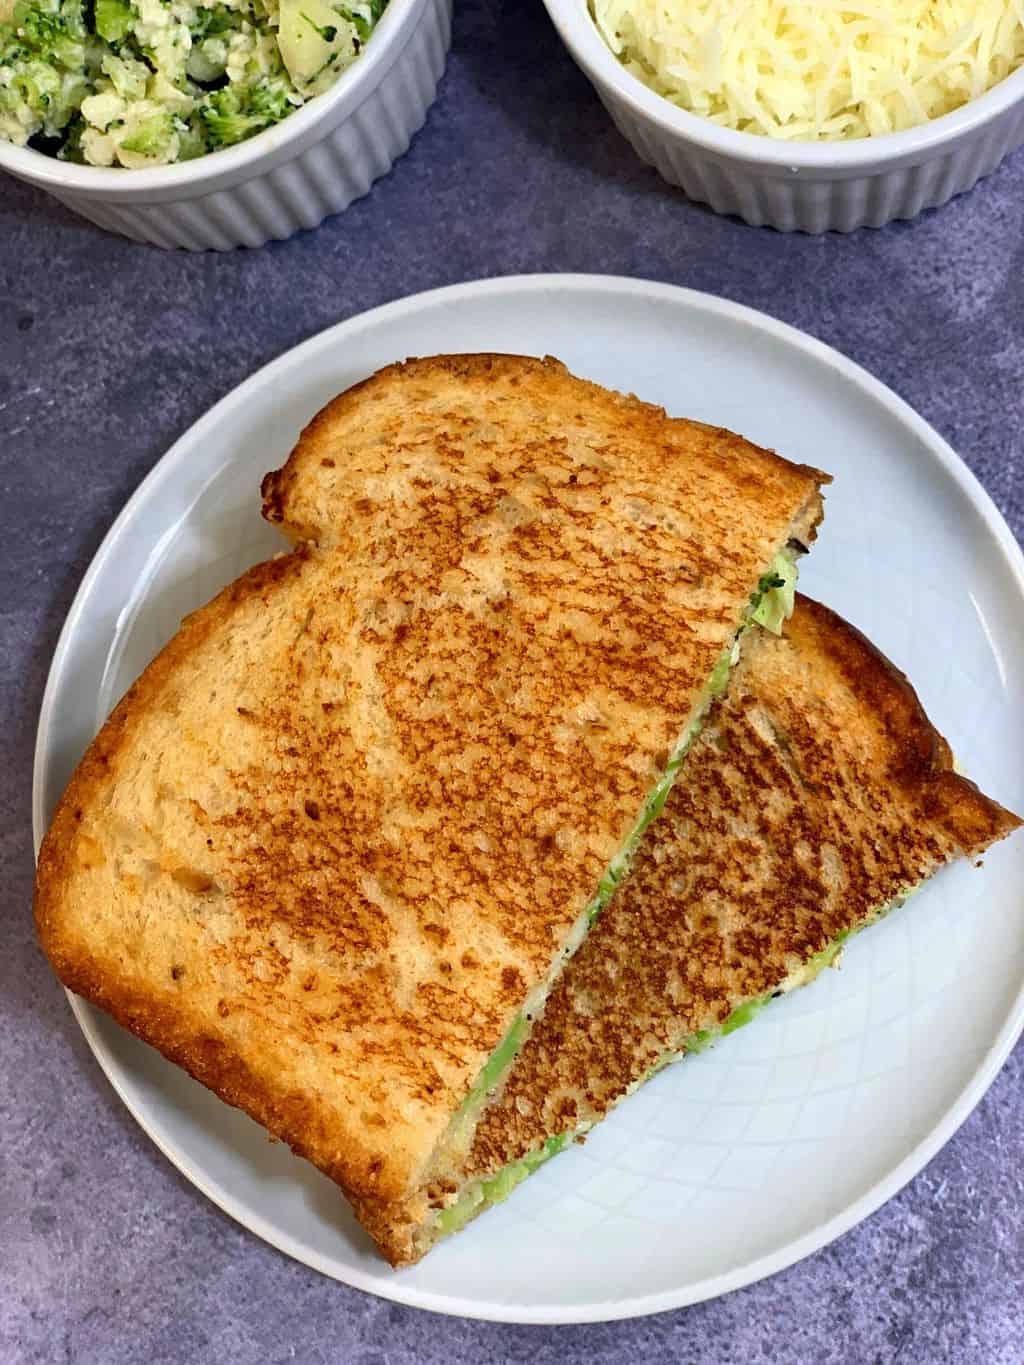 Broccoli Paneer Mayo Sandwich cut into half served on a plate with cheese on the side